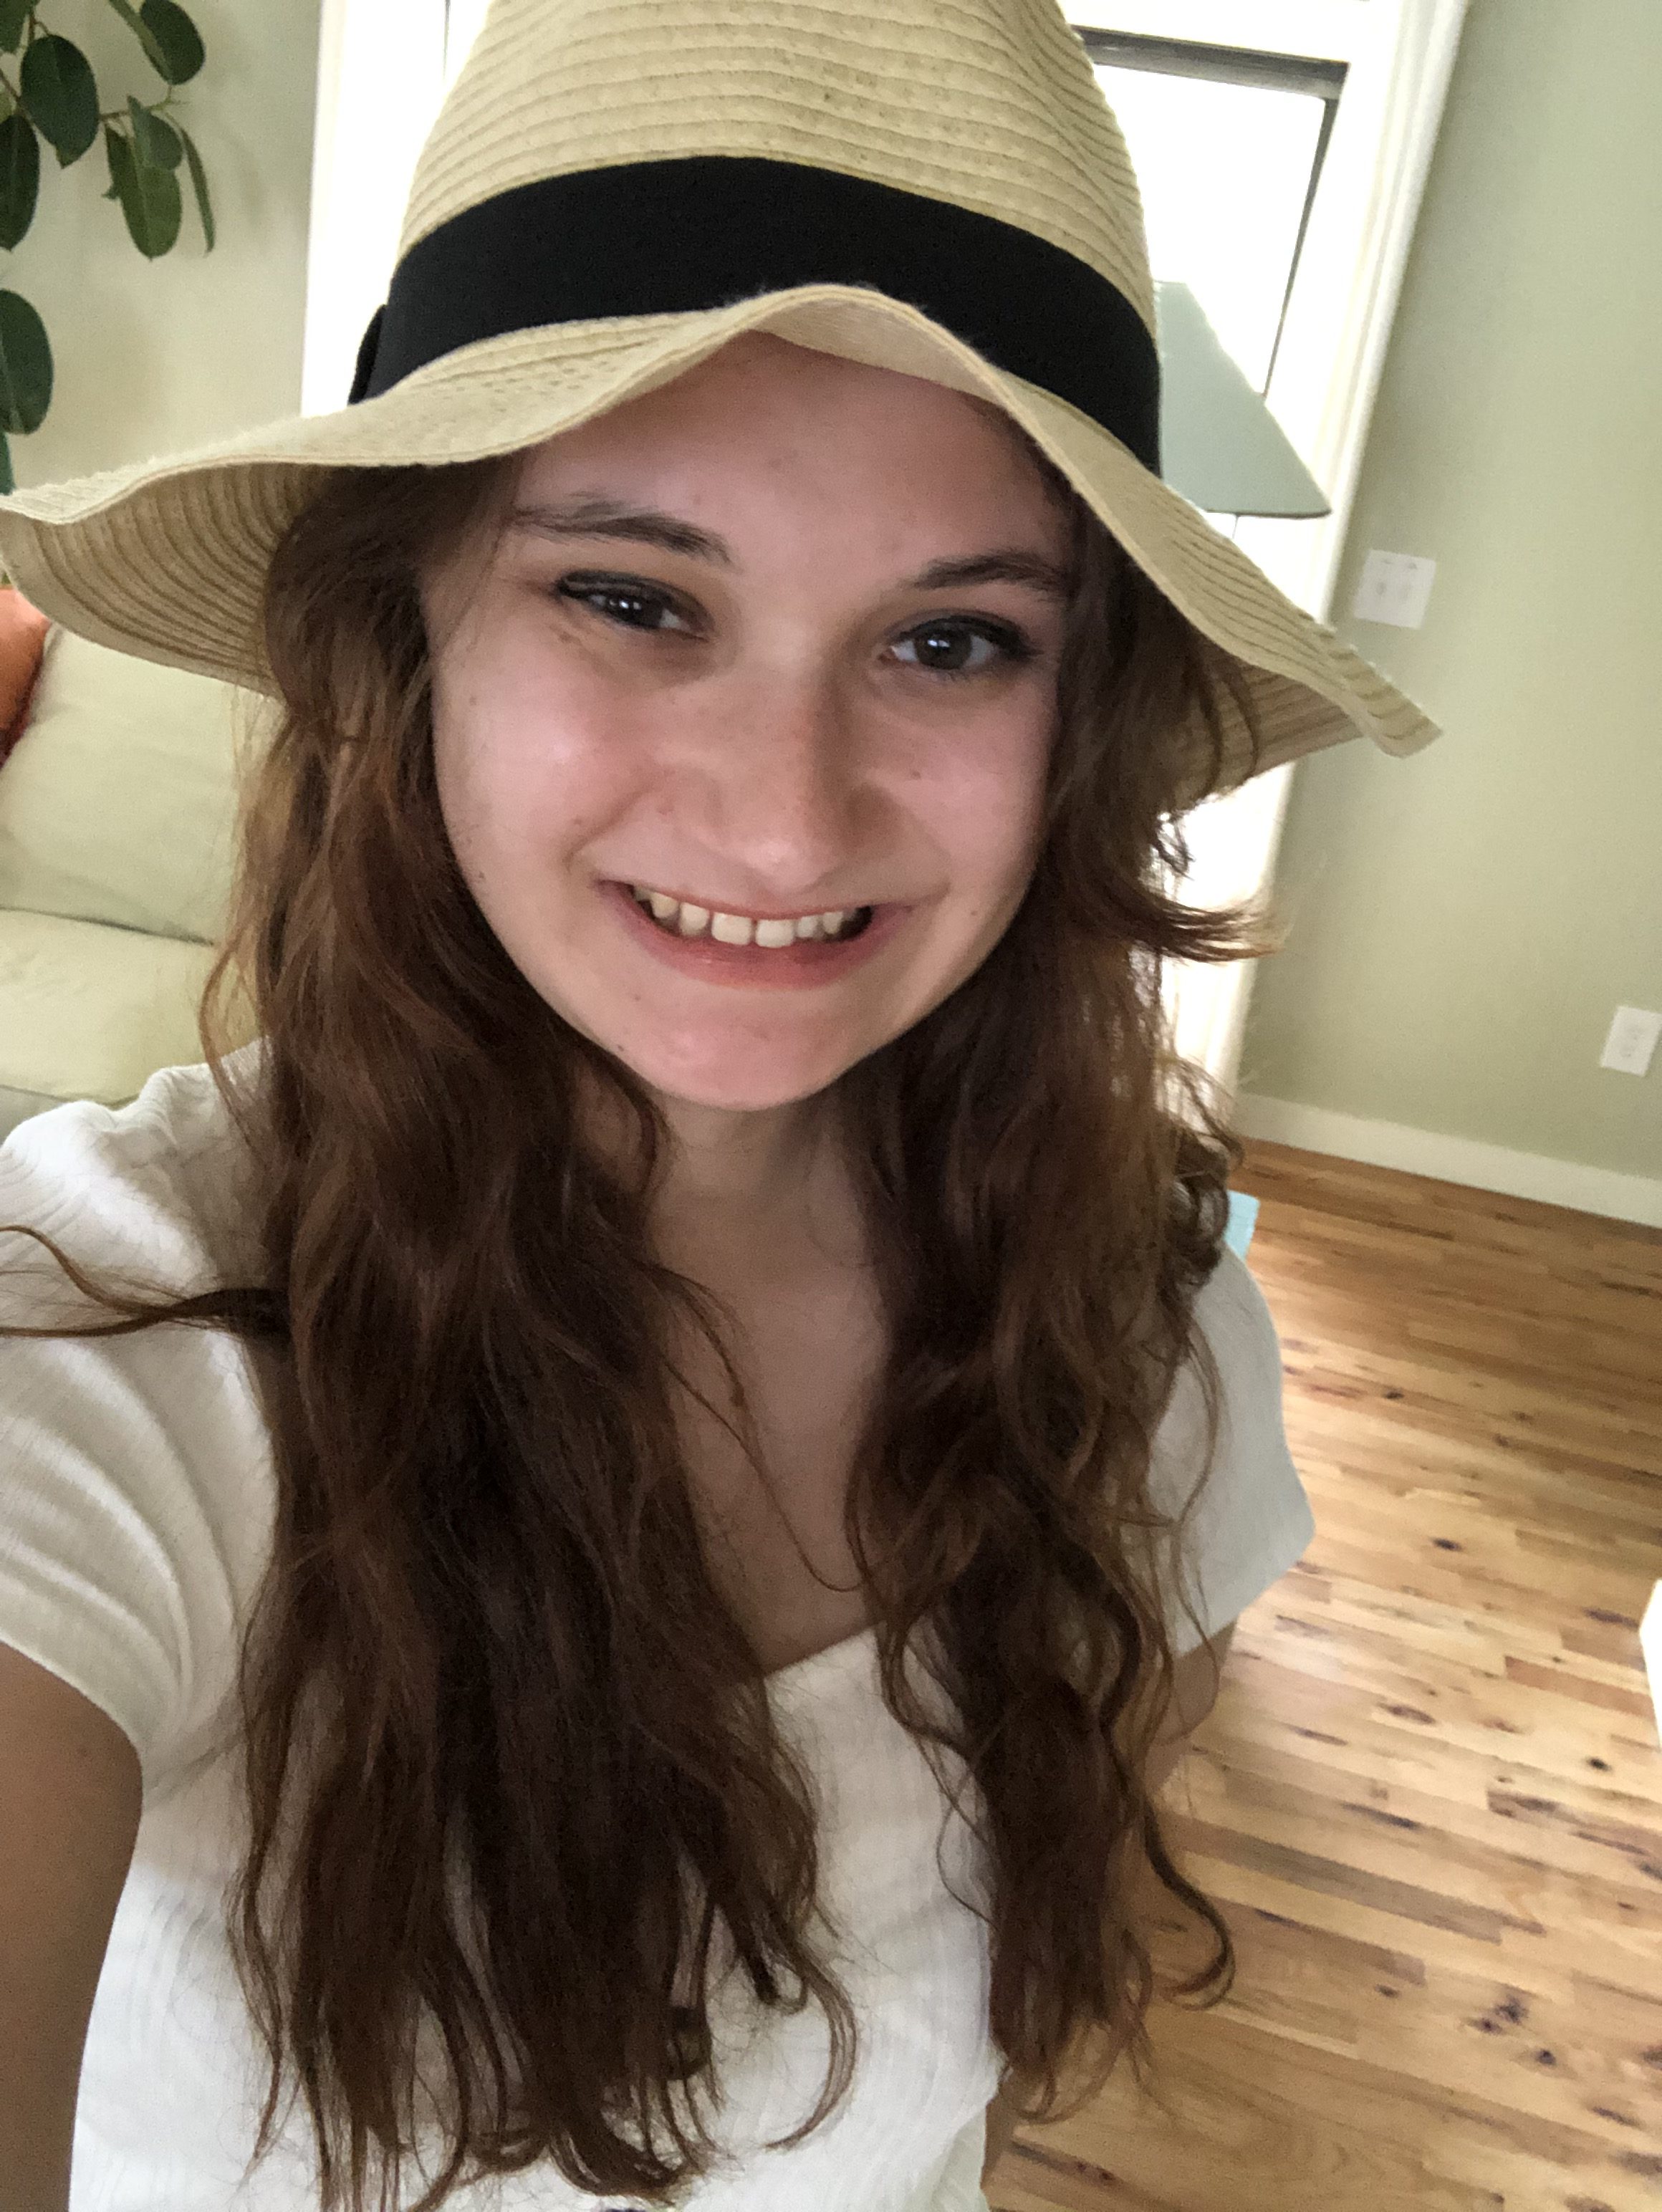 Kelly wearing a straw hat and smiling.